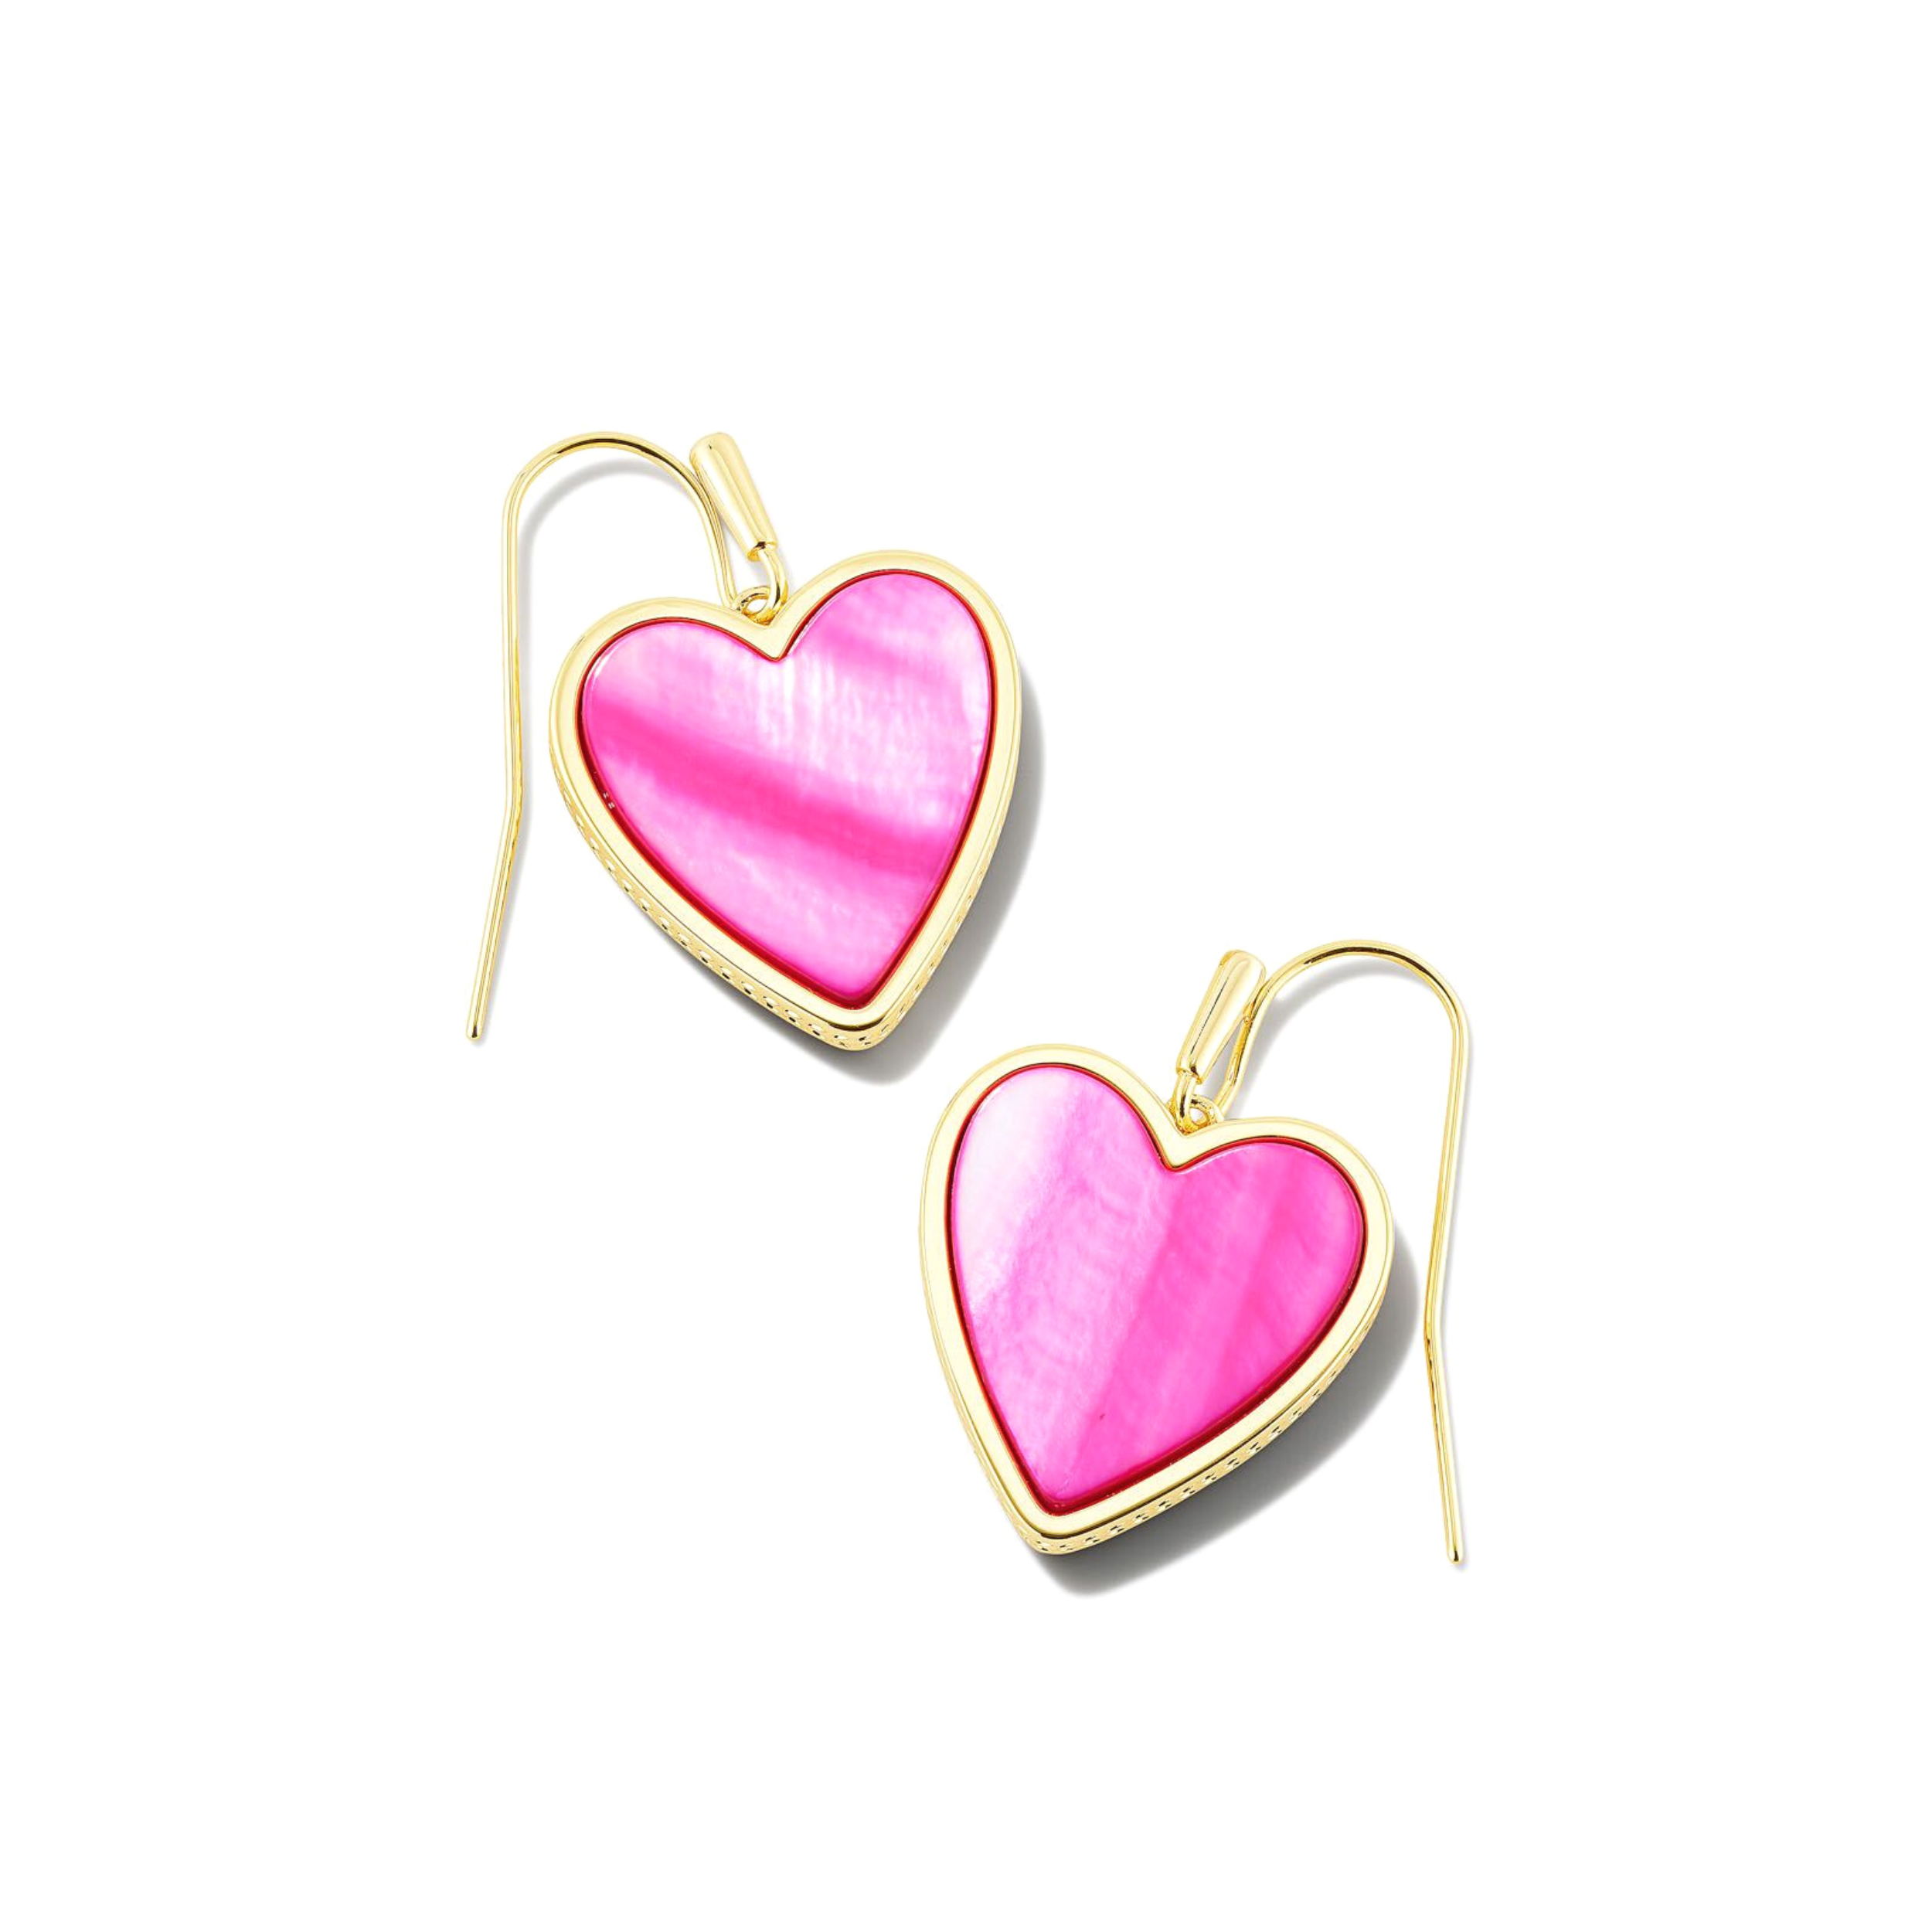 Kendra Scott | Heart Gold Drop Earrings in Hot Pink Mother of Pearl - Giddy Up Glamour Boutique